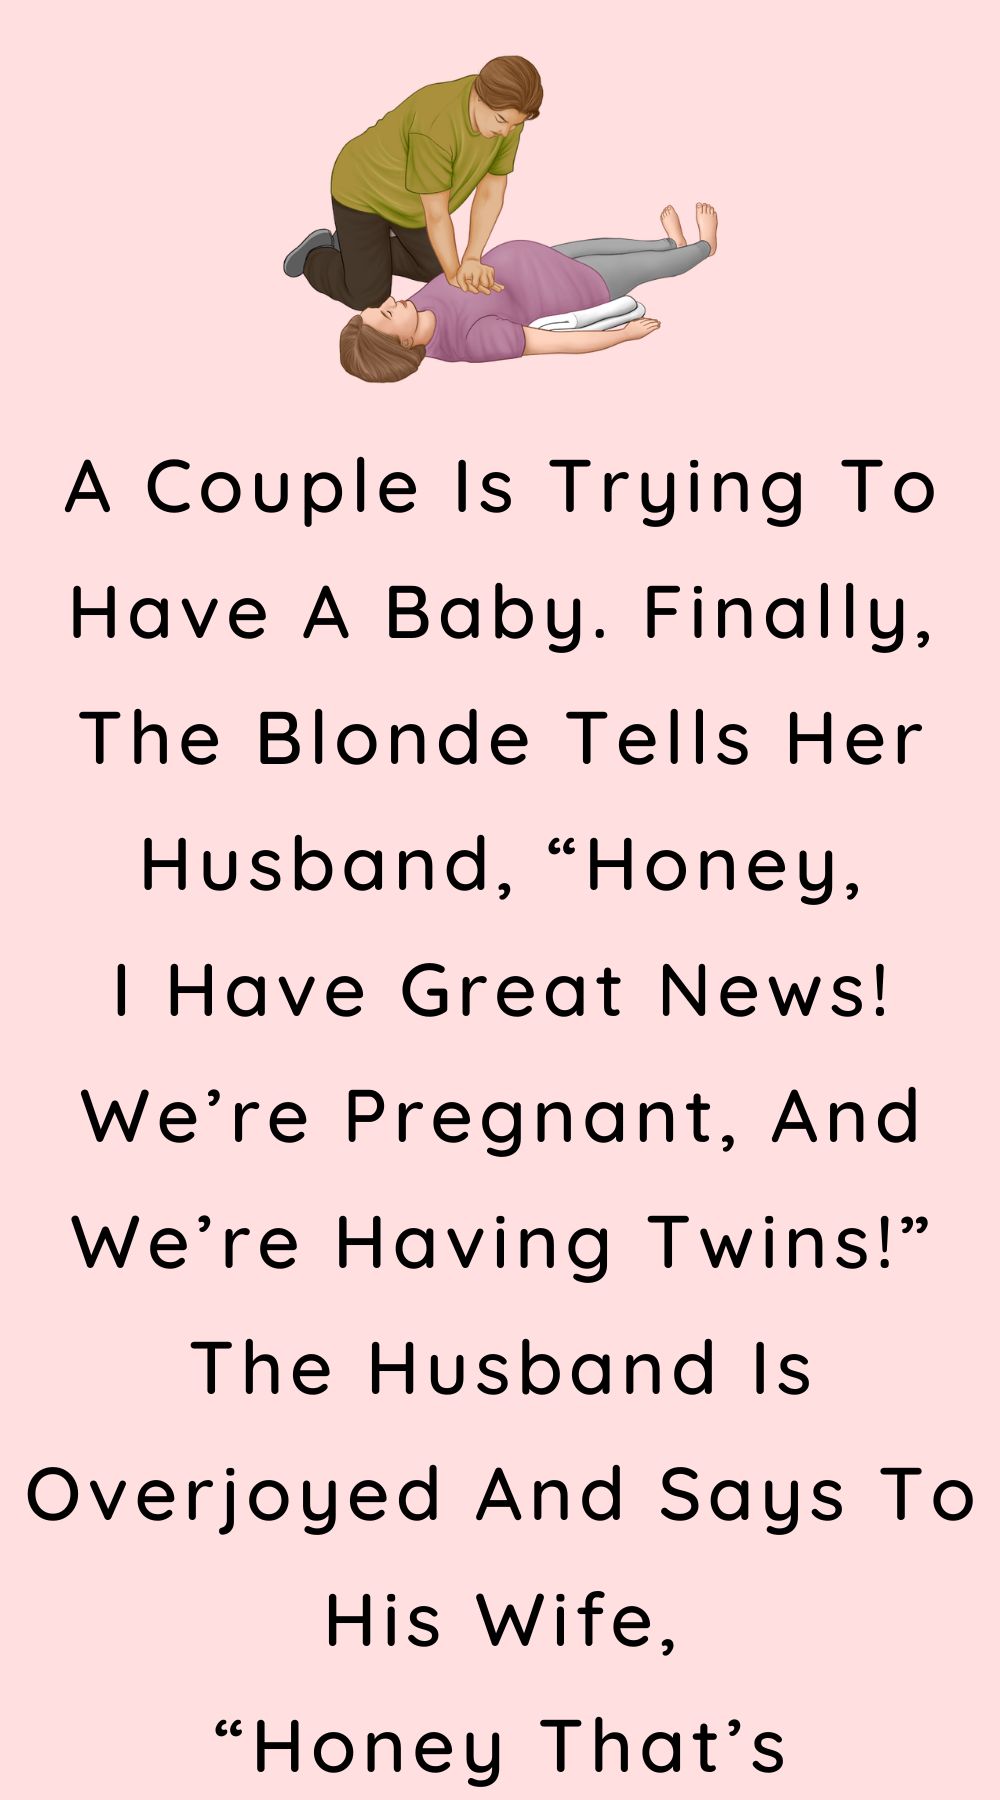 A Couple Is Trying To Have A Baby